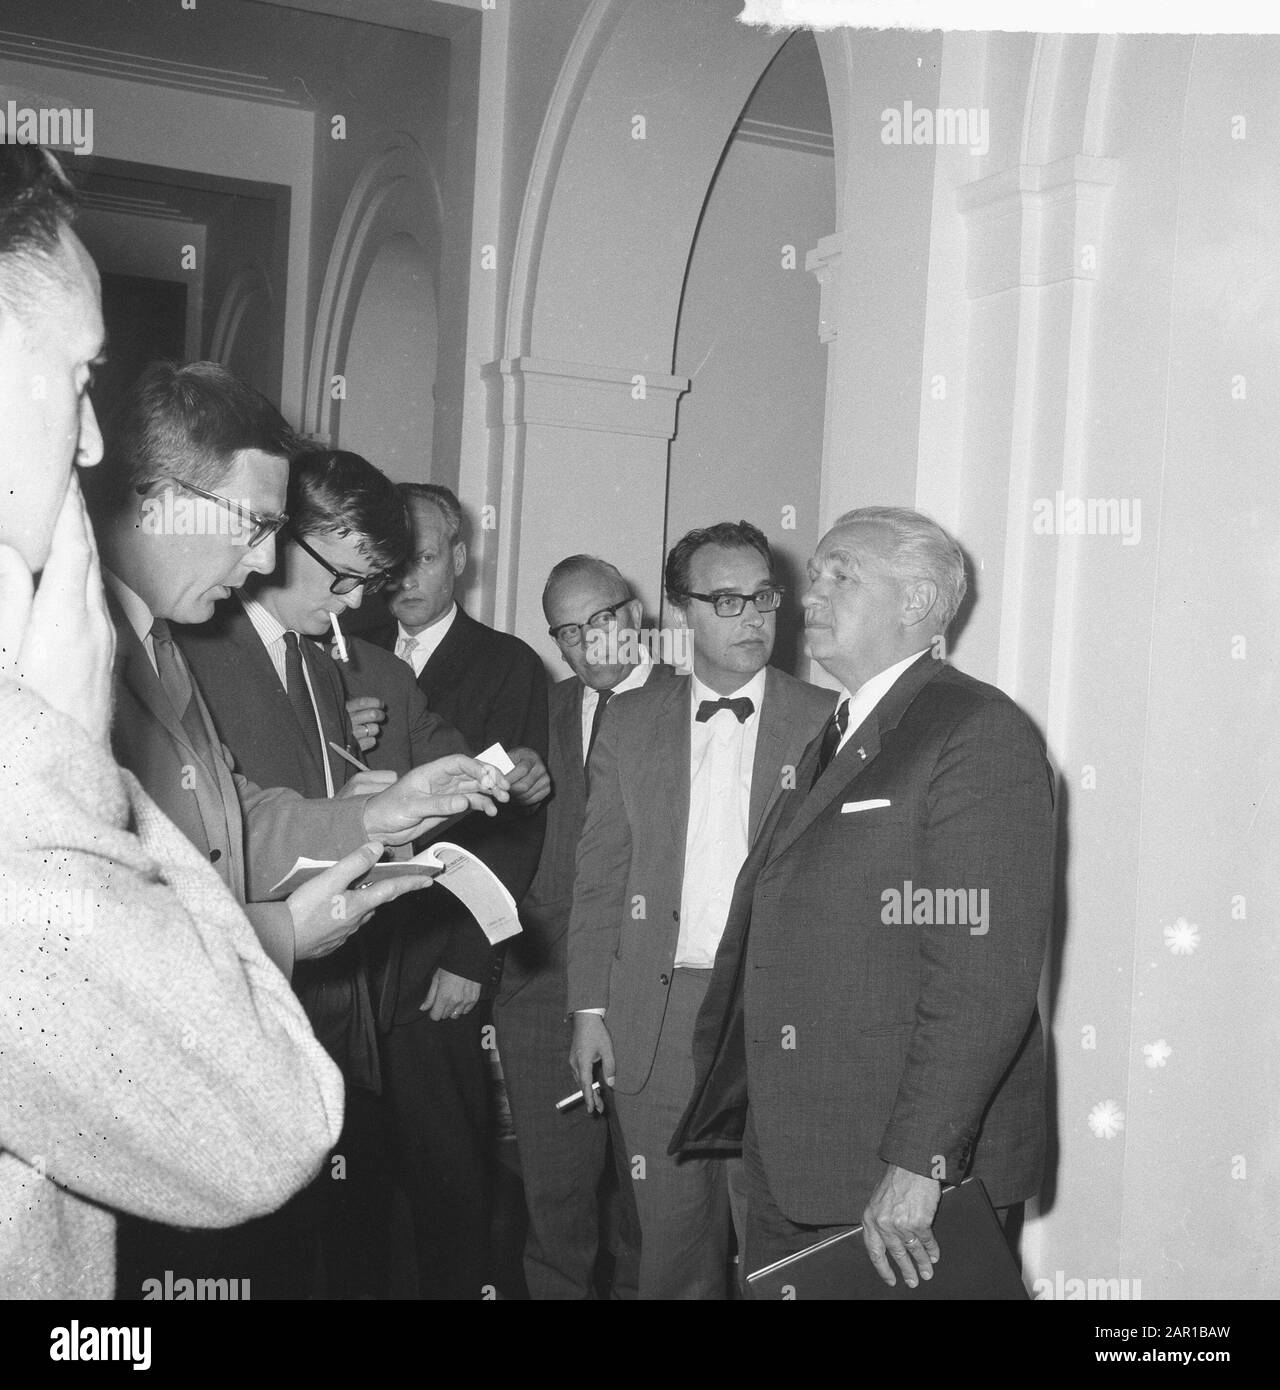 Group leaders at Minister President Cals, mr. Van Thiel with journalists Date: June 22, 1965 Keywords: JOURNALISS, group leaders Personal name: Thiel, French-Joseph of Stock Photo